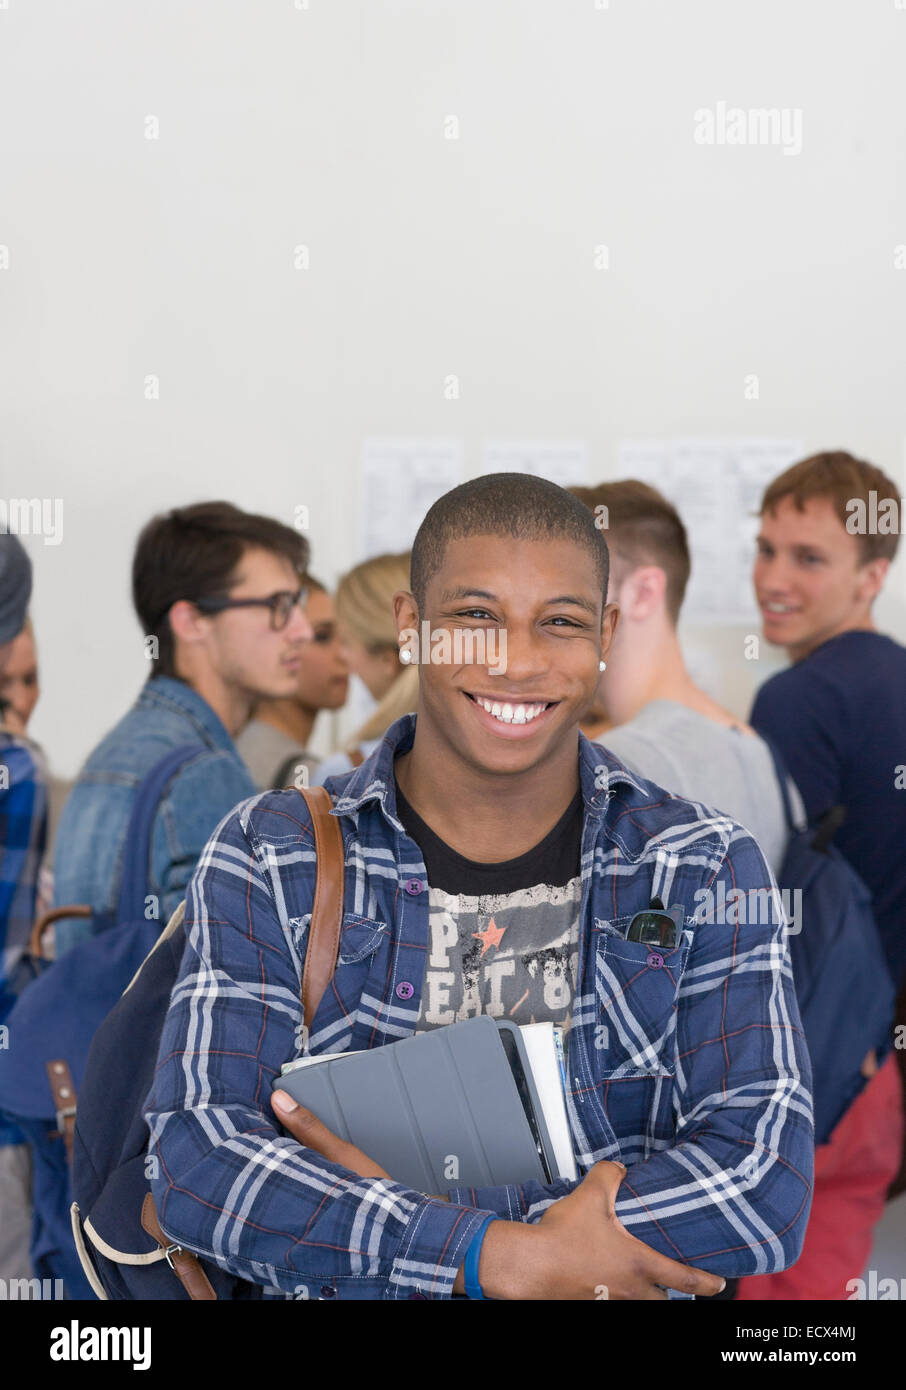 Male student holding books and smiling at camera with other students in background Stock Photo